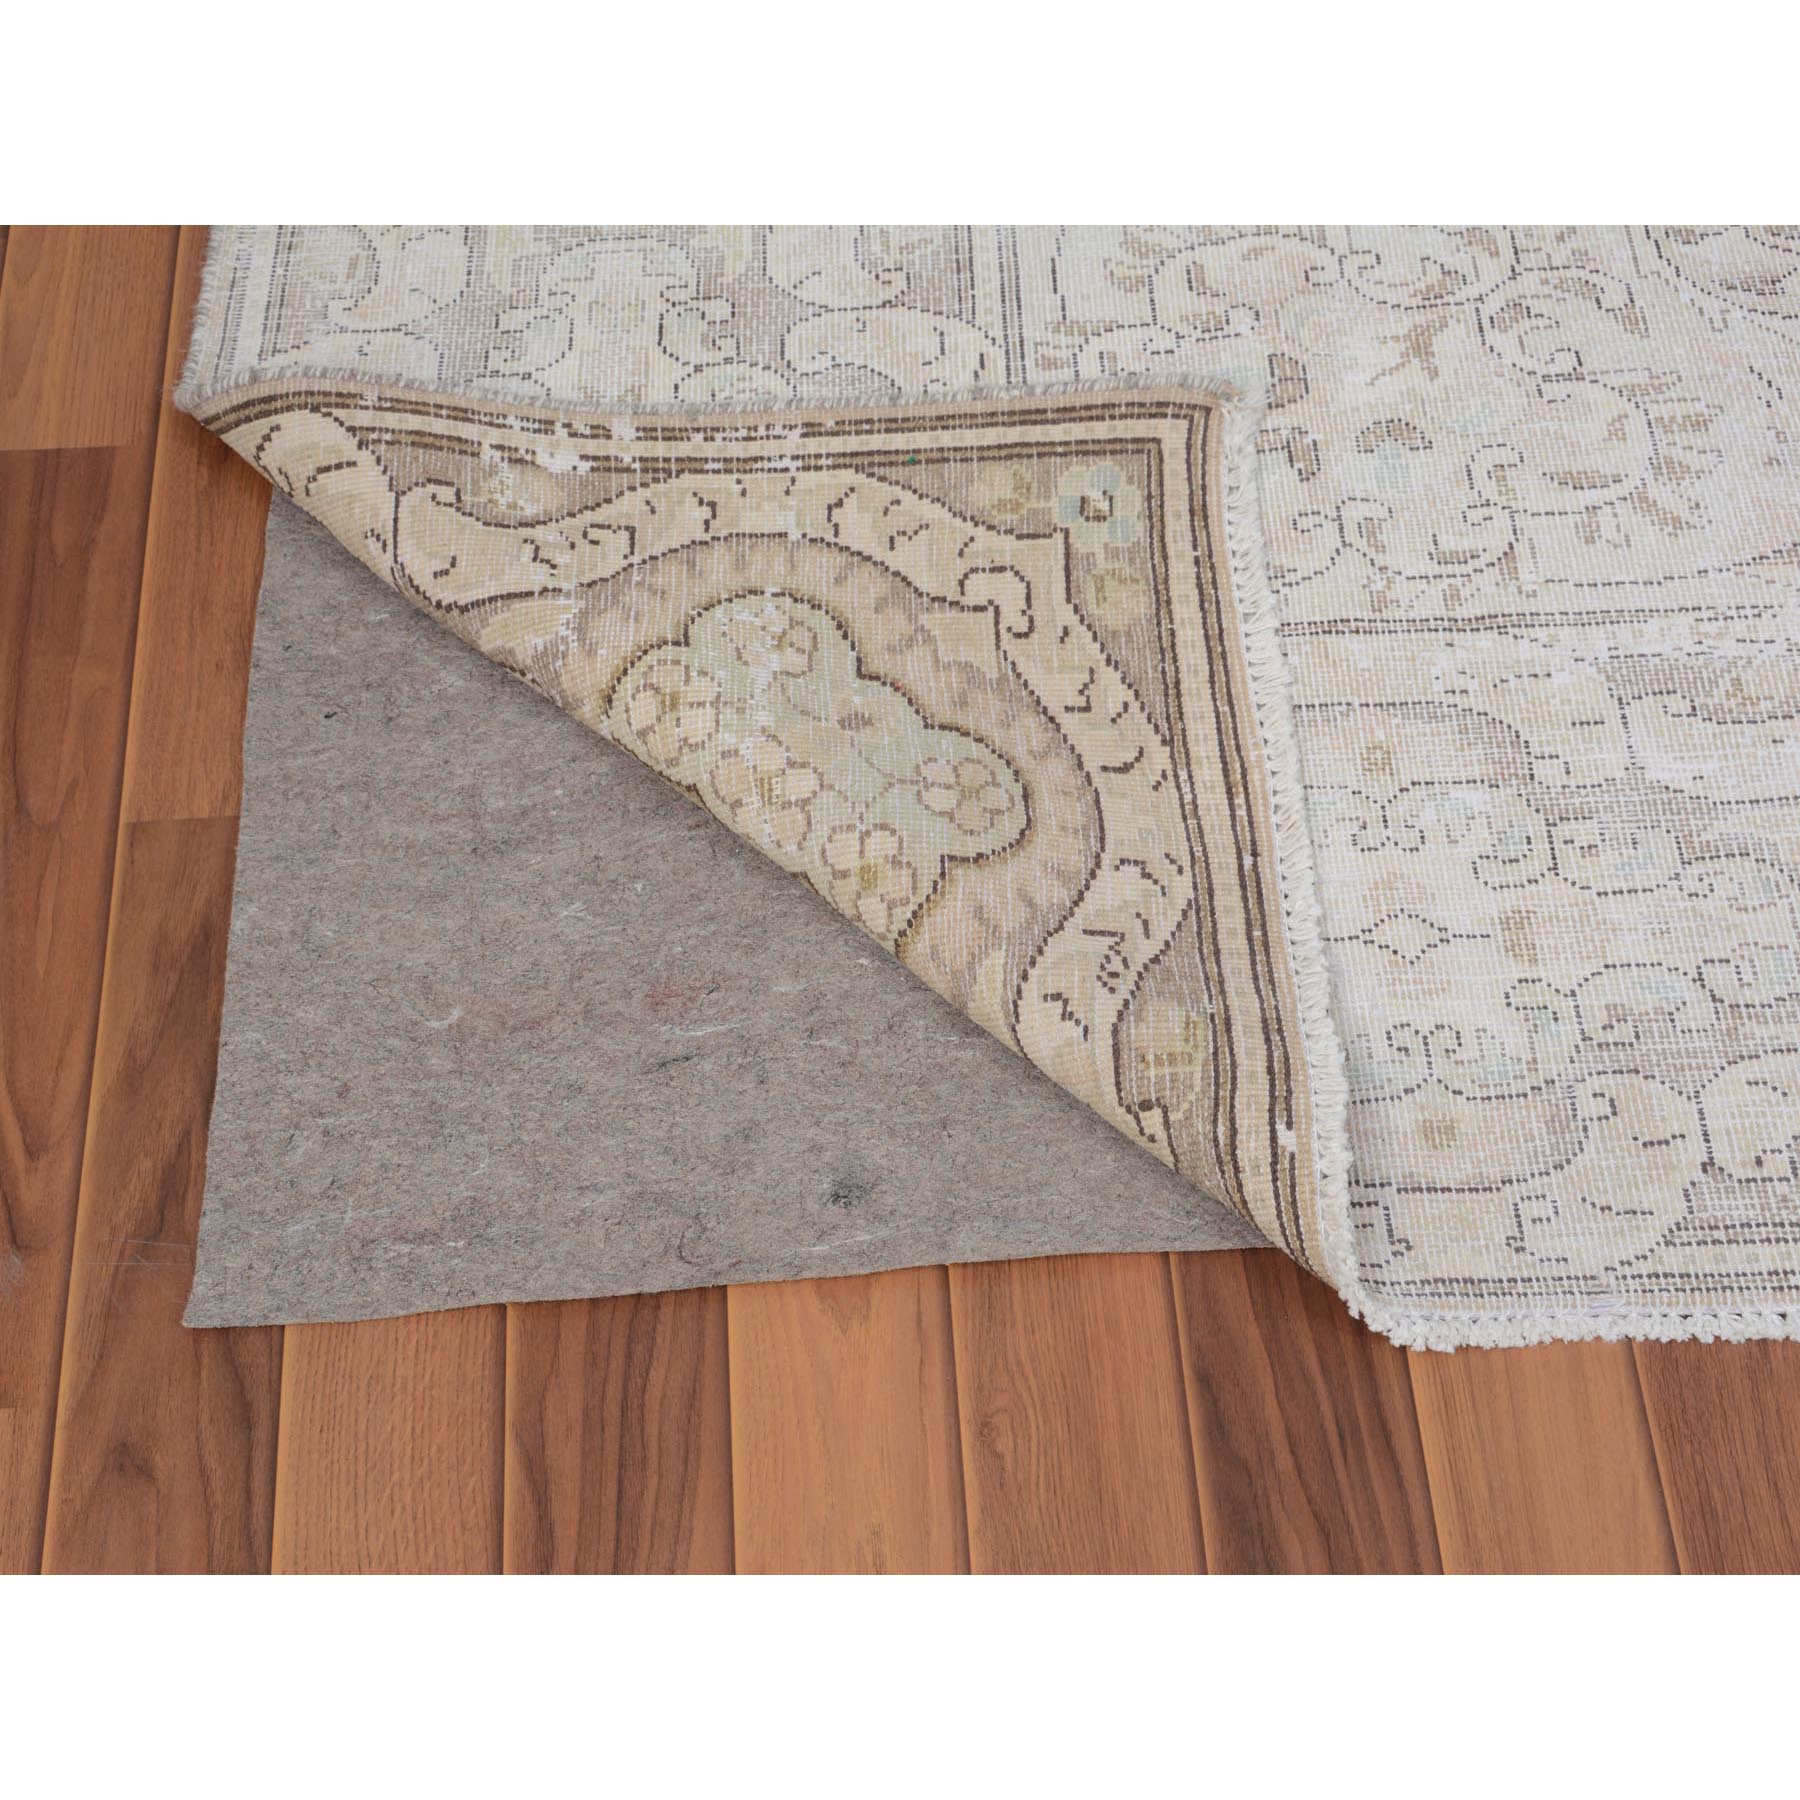 8-x10-5  Beige Washed Out and Worn Down Vintage Persian Kerman Pure Wool Hand Knotted Oriental Rug 